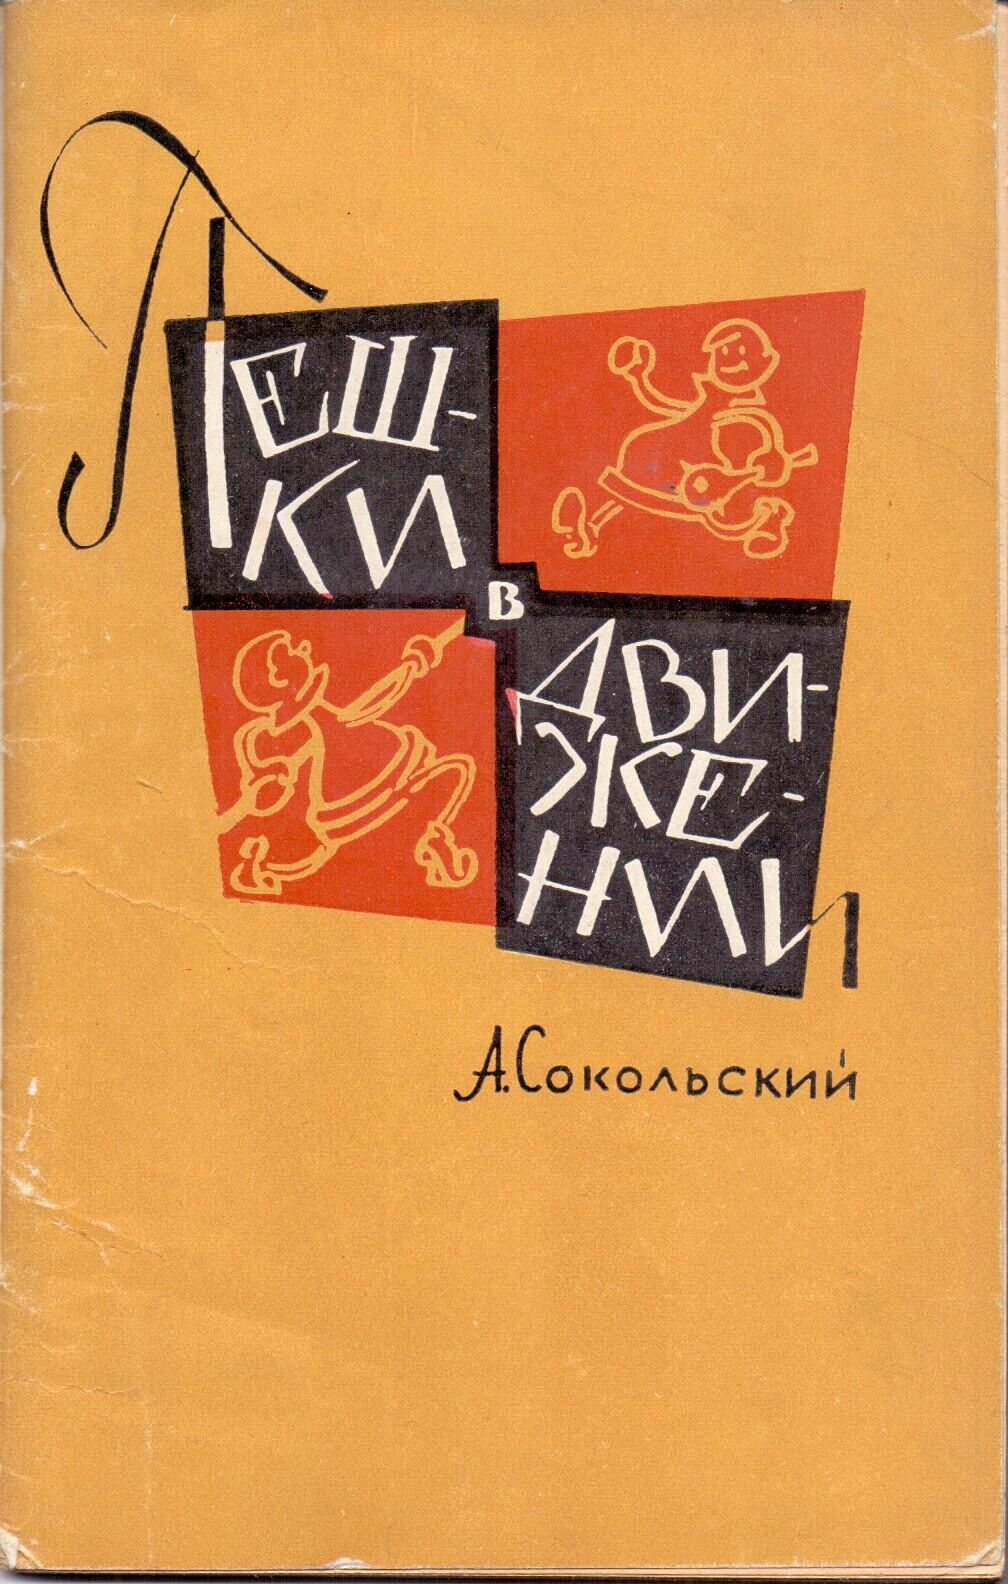 11037.Chess Book. Signed by A. Sokolsky to Ya. Rokhlin. Pawns in Motion. Moscow. 1962